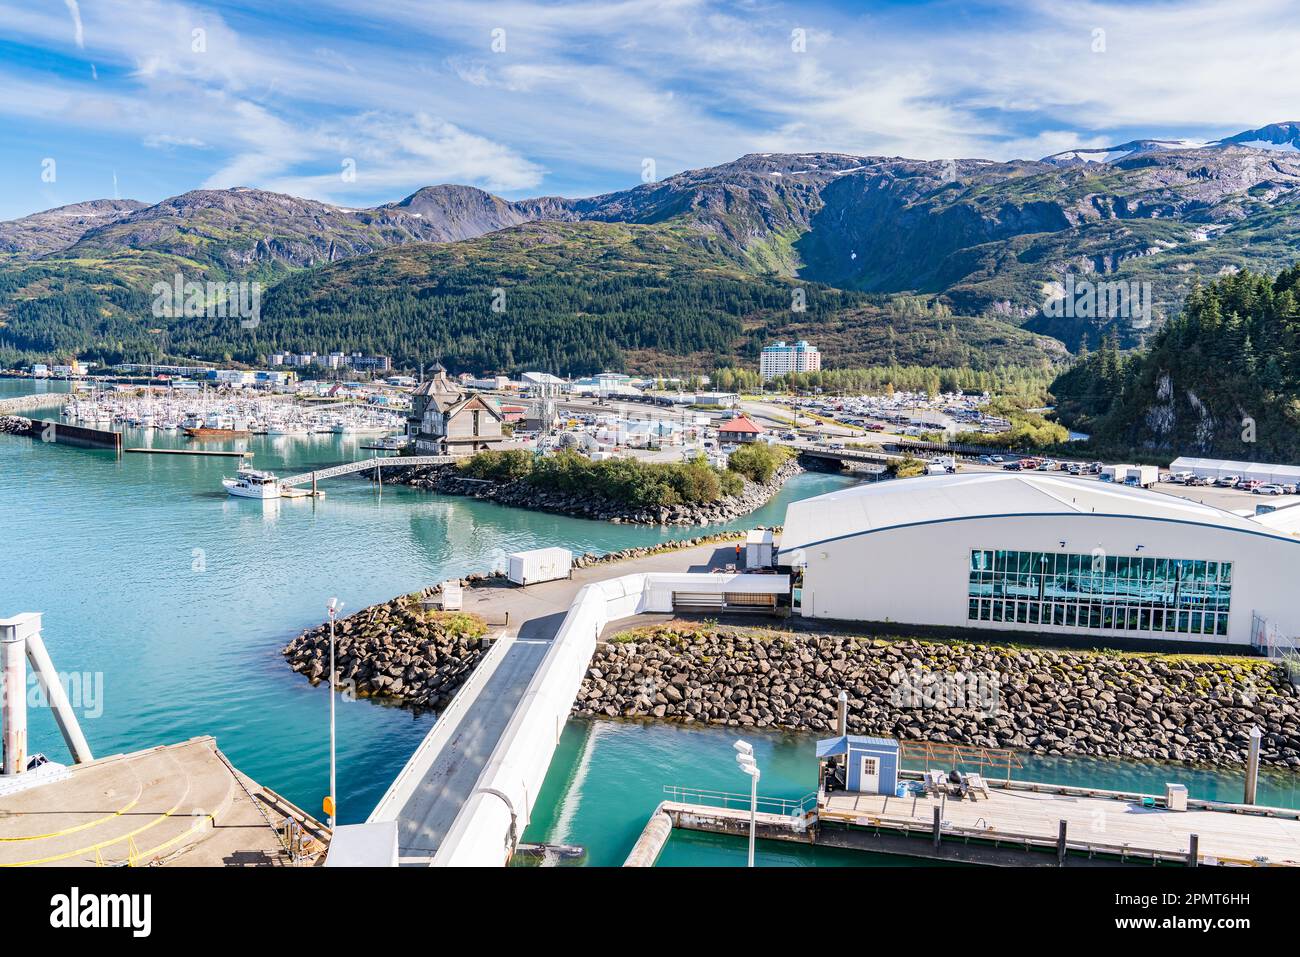 Whittier, AK - September 4, 2022 - Skyline of the port of Whittier, Alaska with the cruise ship terminal in the foreground. Stock Photo